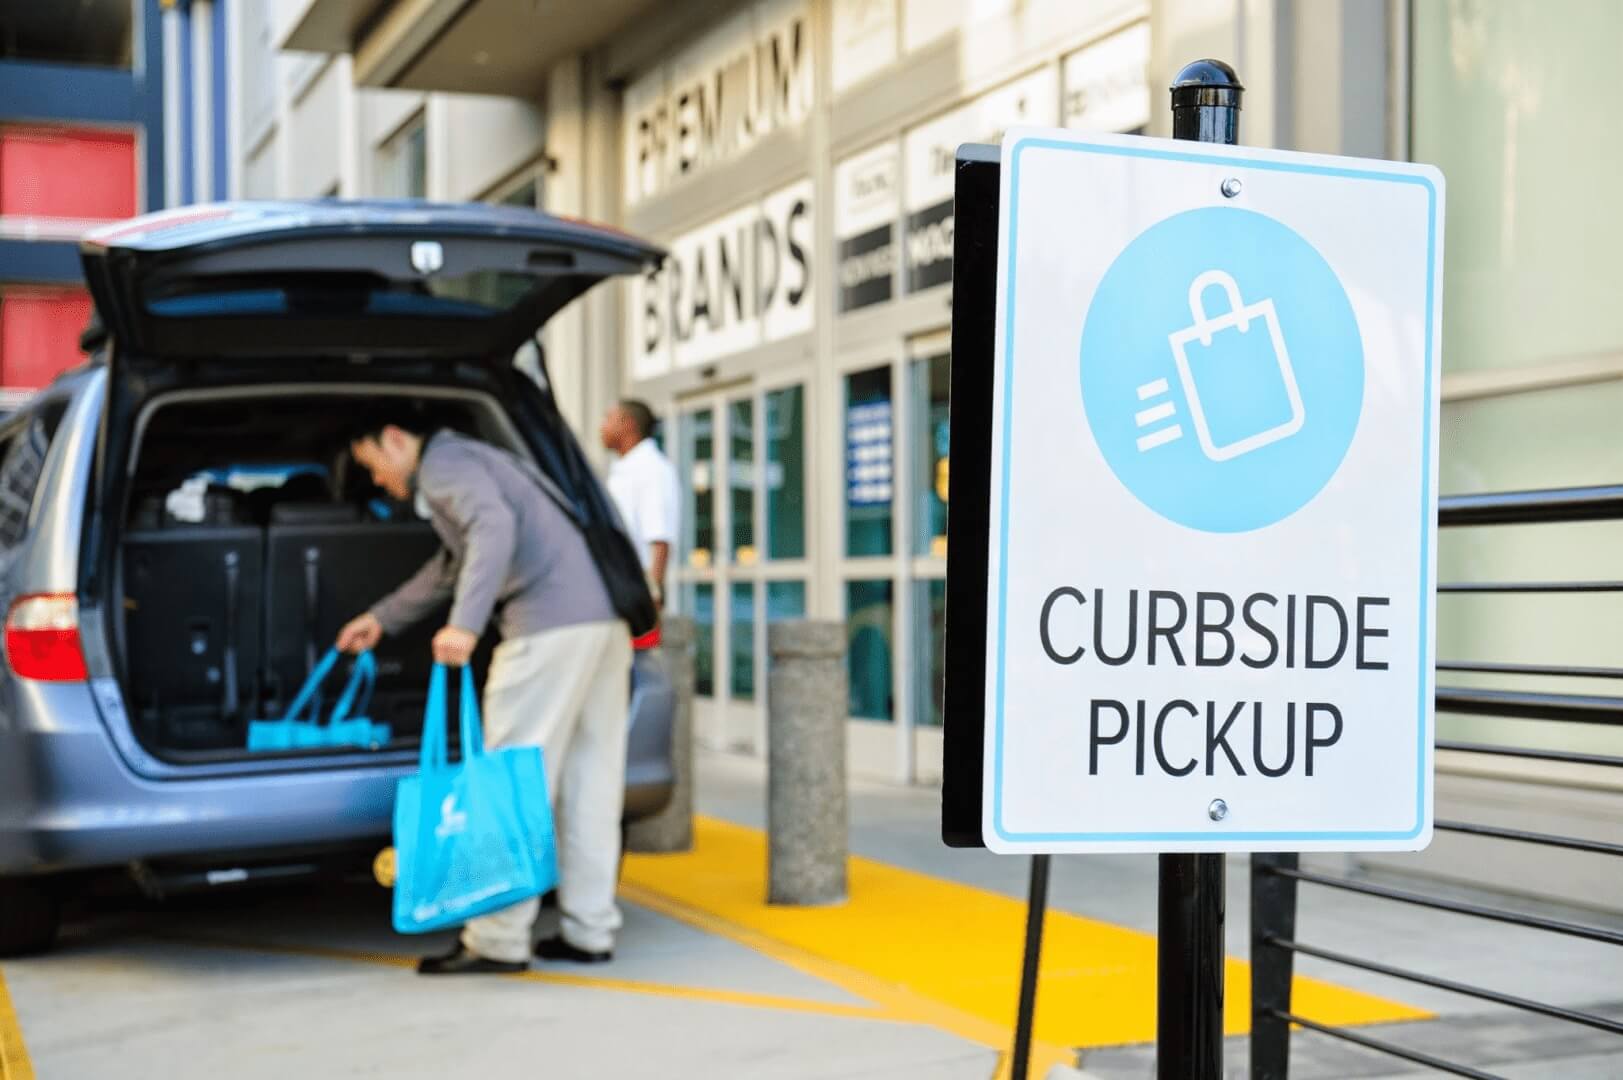 What is curbside pickup and how does it work?